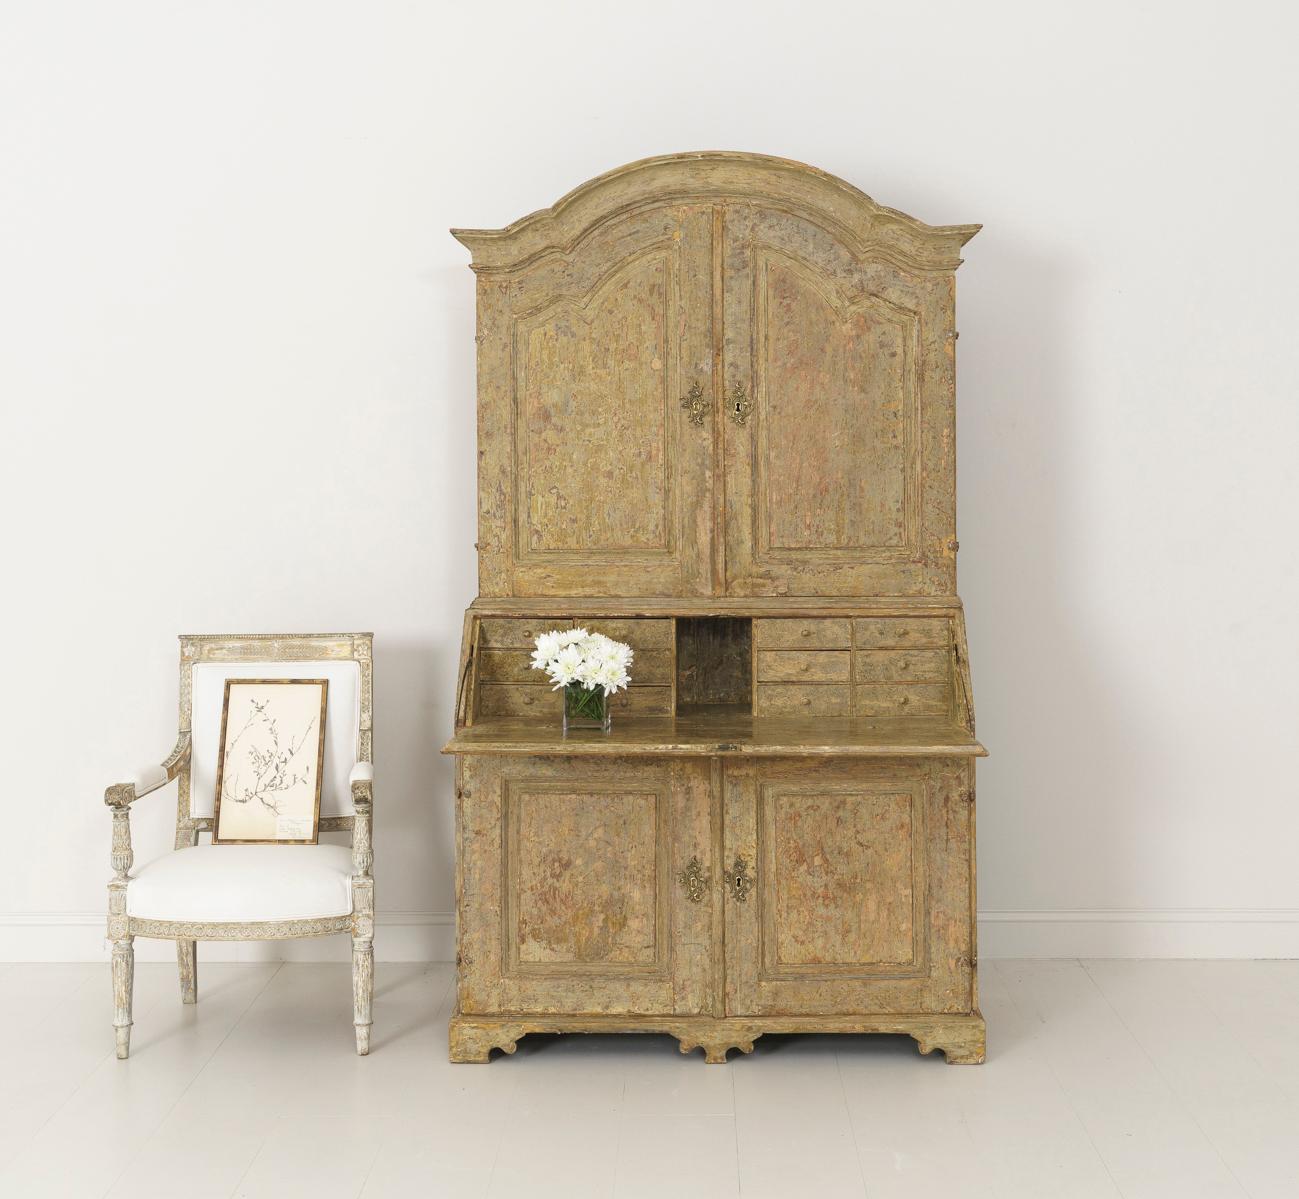 A Swedish Baroque period slant-front secretary from the 18th century in two parts with arched cornice and shaped apron. Brass hardware and original locks, circa 1770. The paint has been hand-scraped down to the original paint surface. The